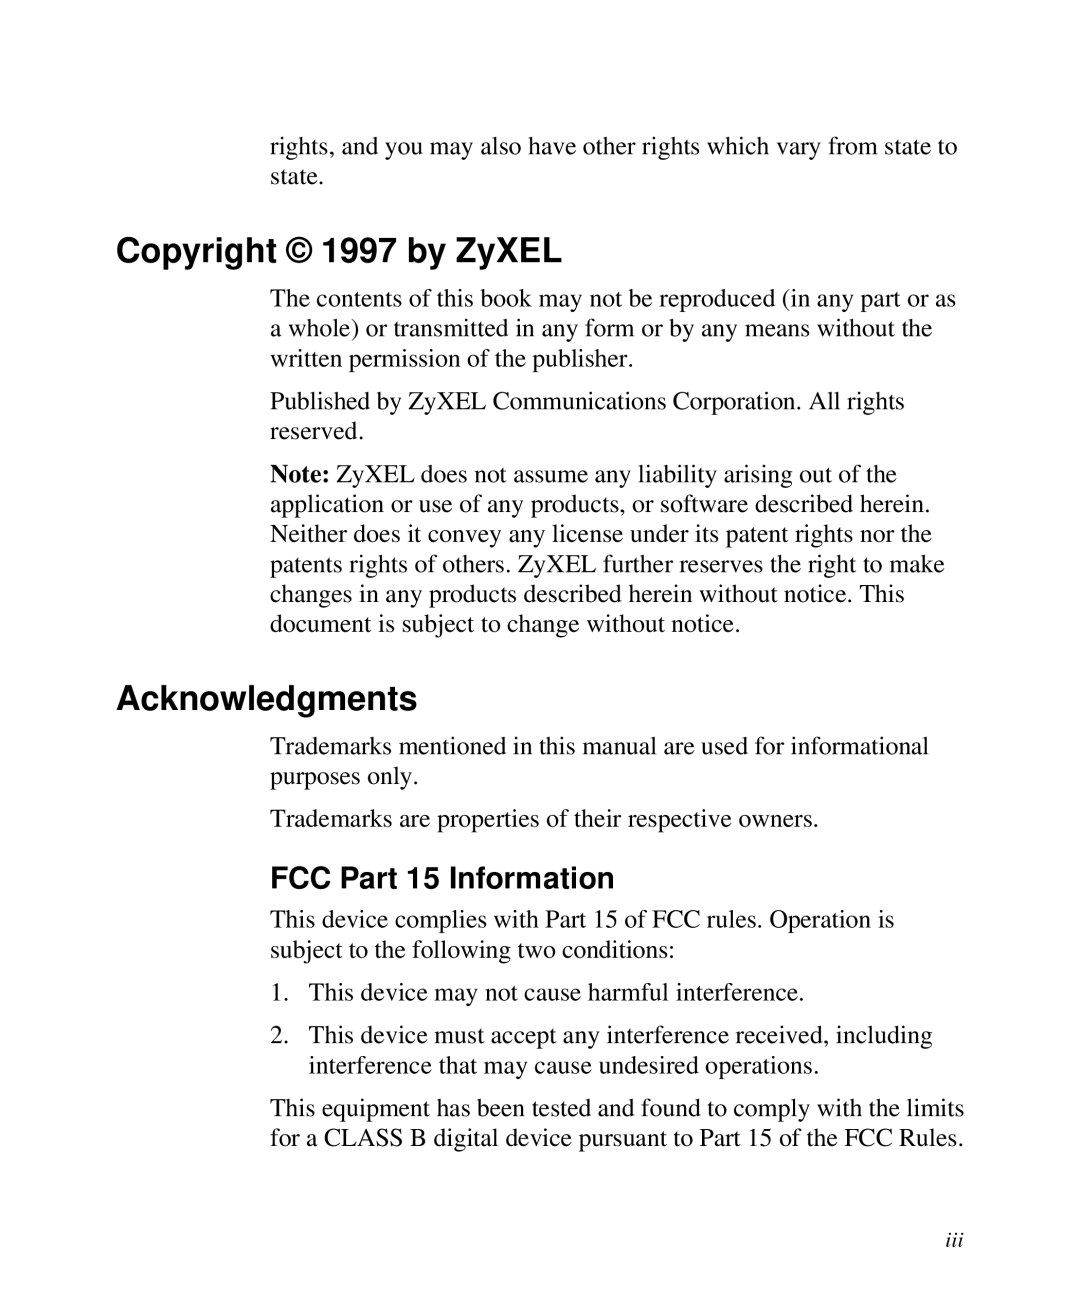 ZyXEL Communications Prestige 128 user manual Copyright 1997 by ZyXEL, Acknowledgments, FCC Part 15 Information 